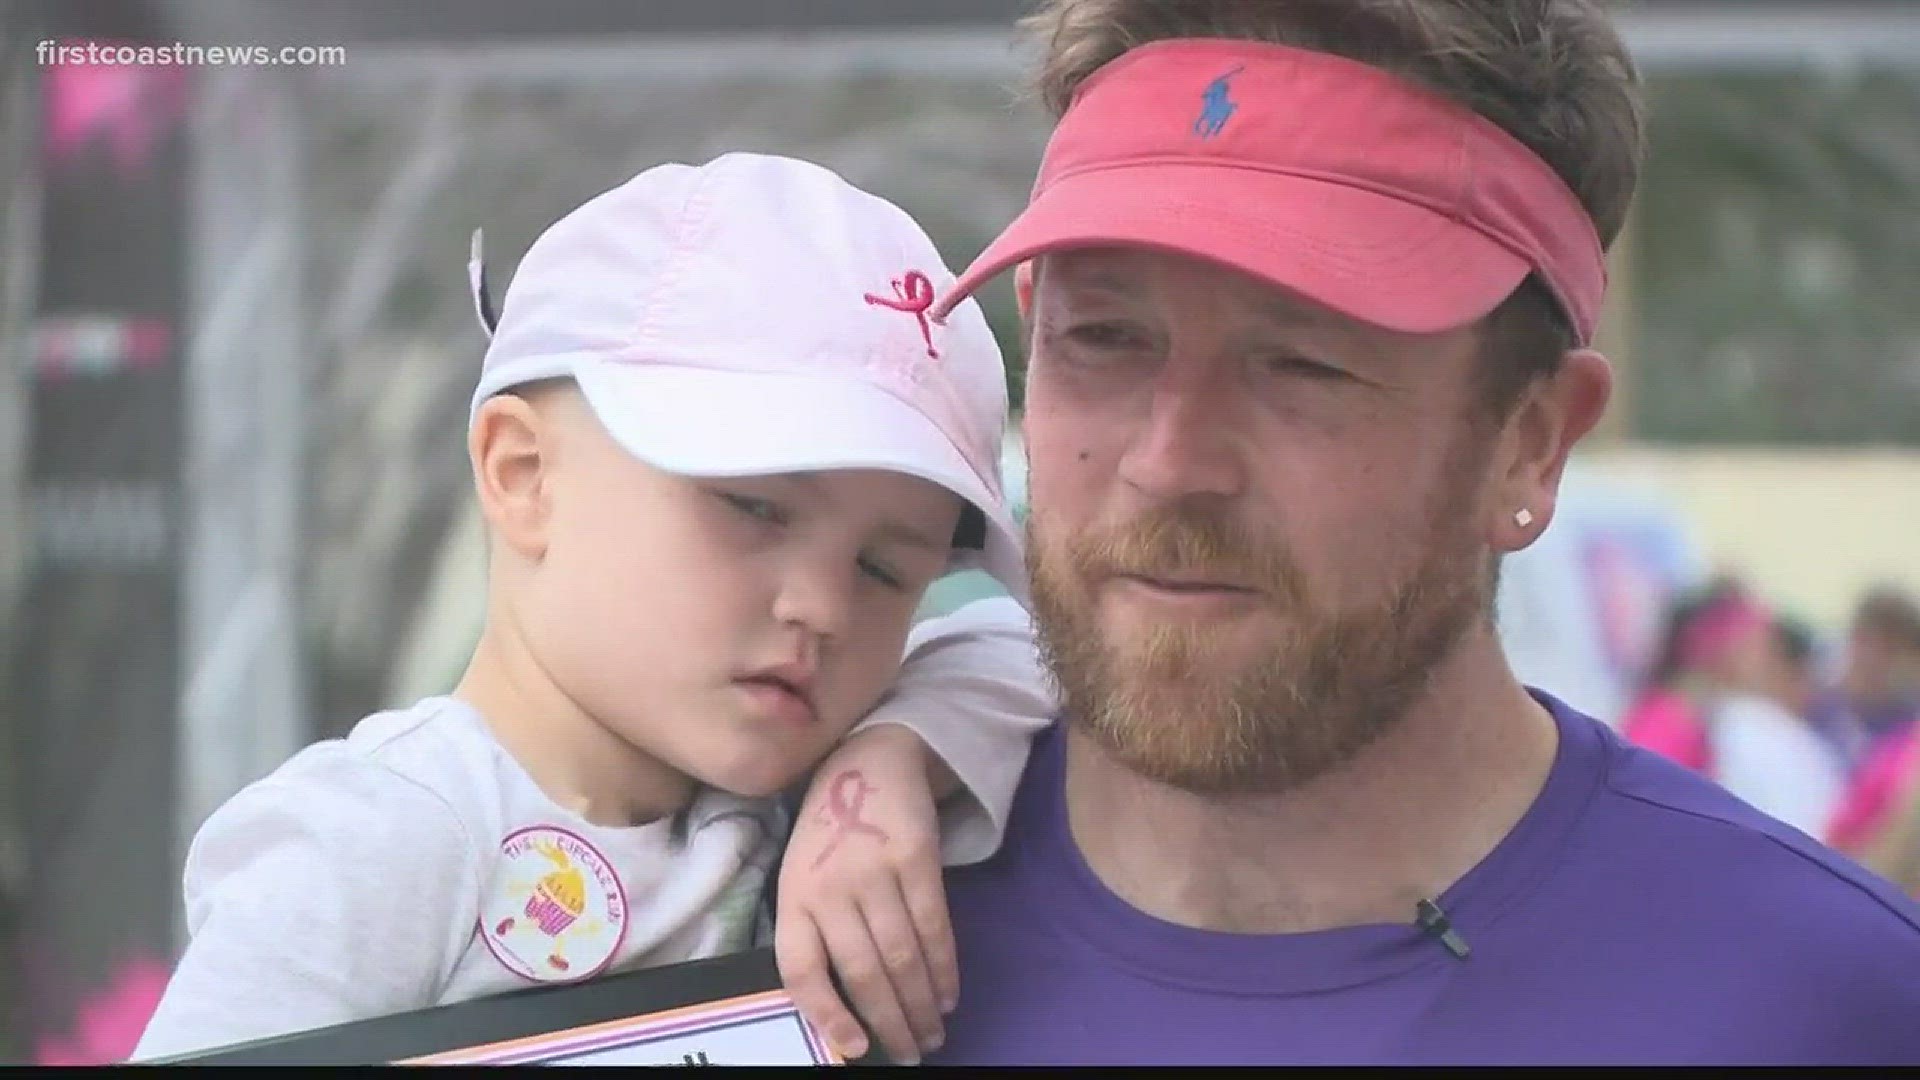 A man from the United Kingdom came to Jacksonville and won the Donna 10K race Saturday after being inspired by his daughter's cancer fight.